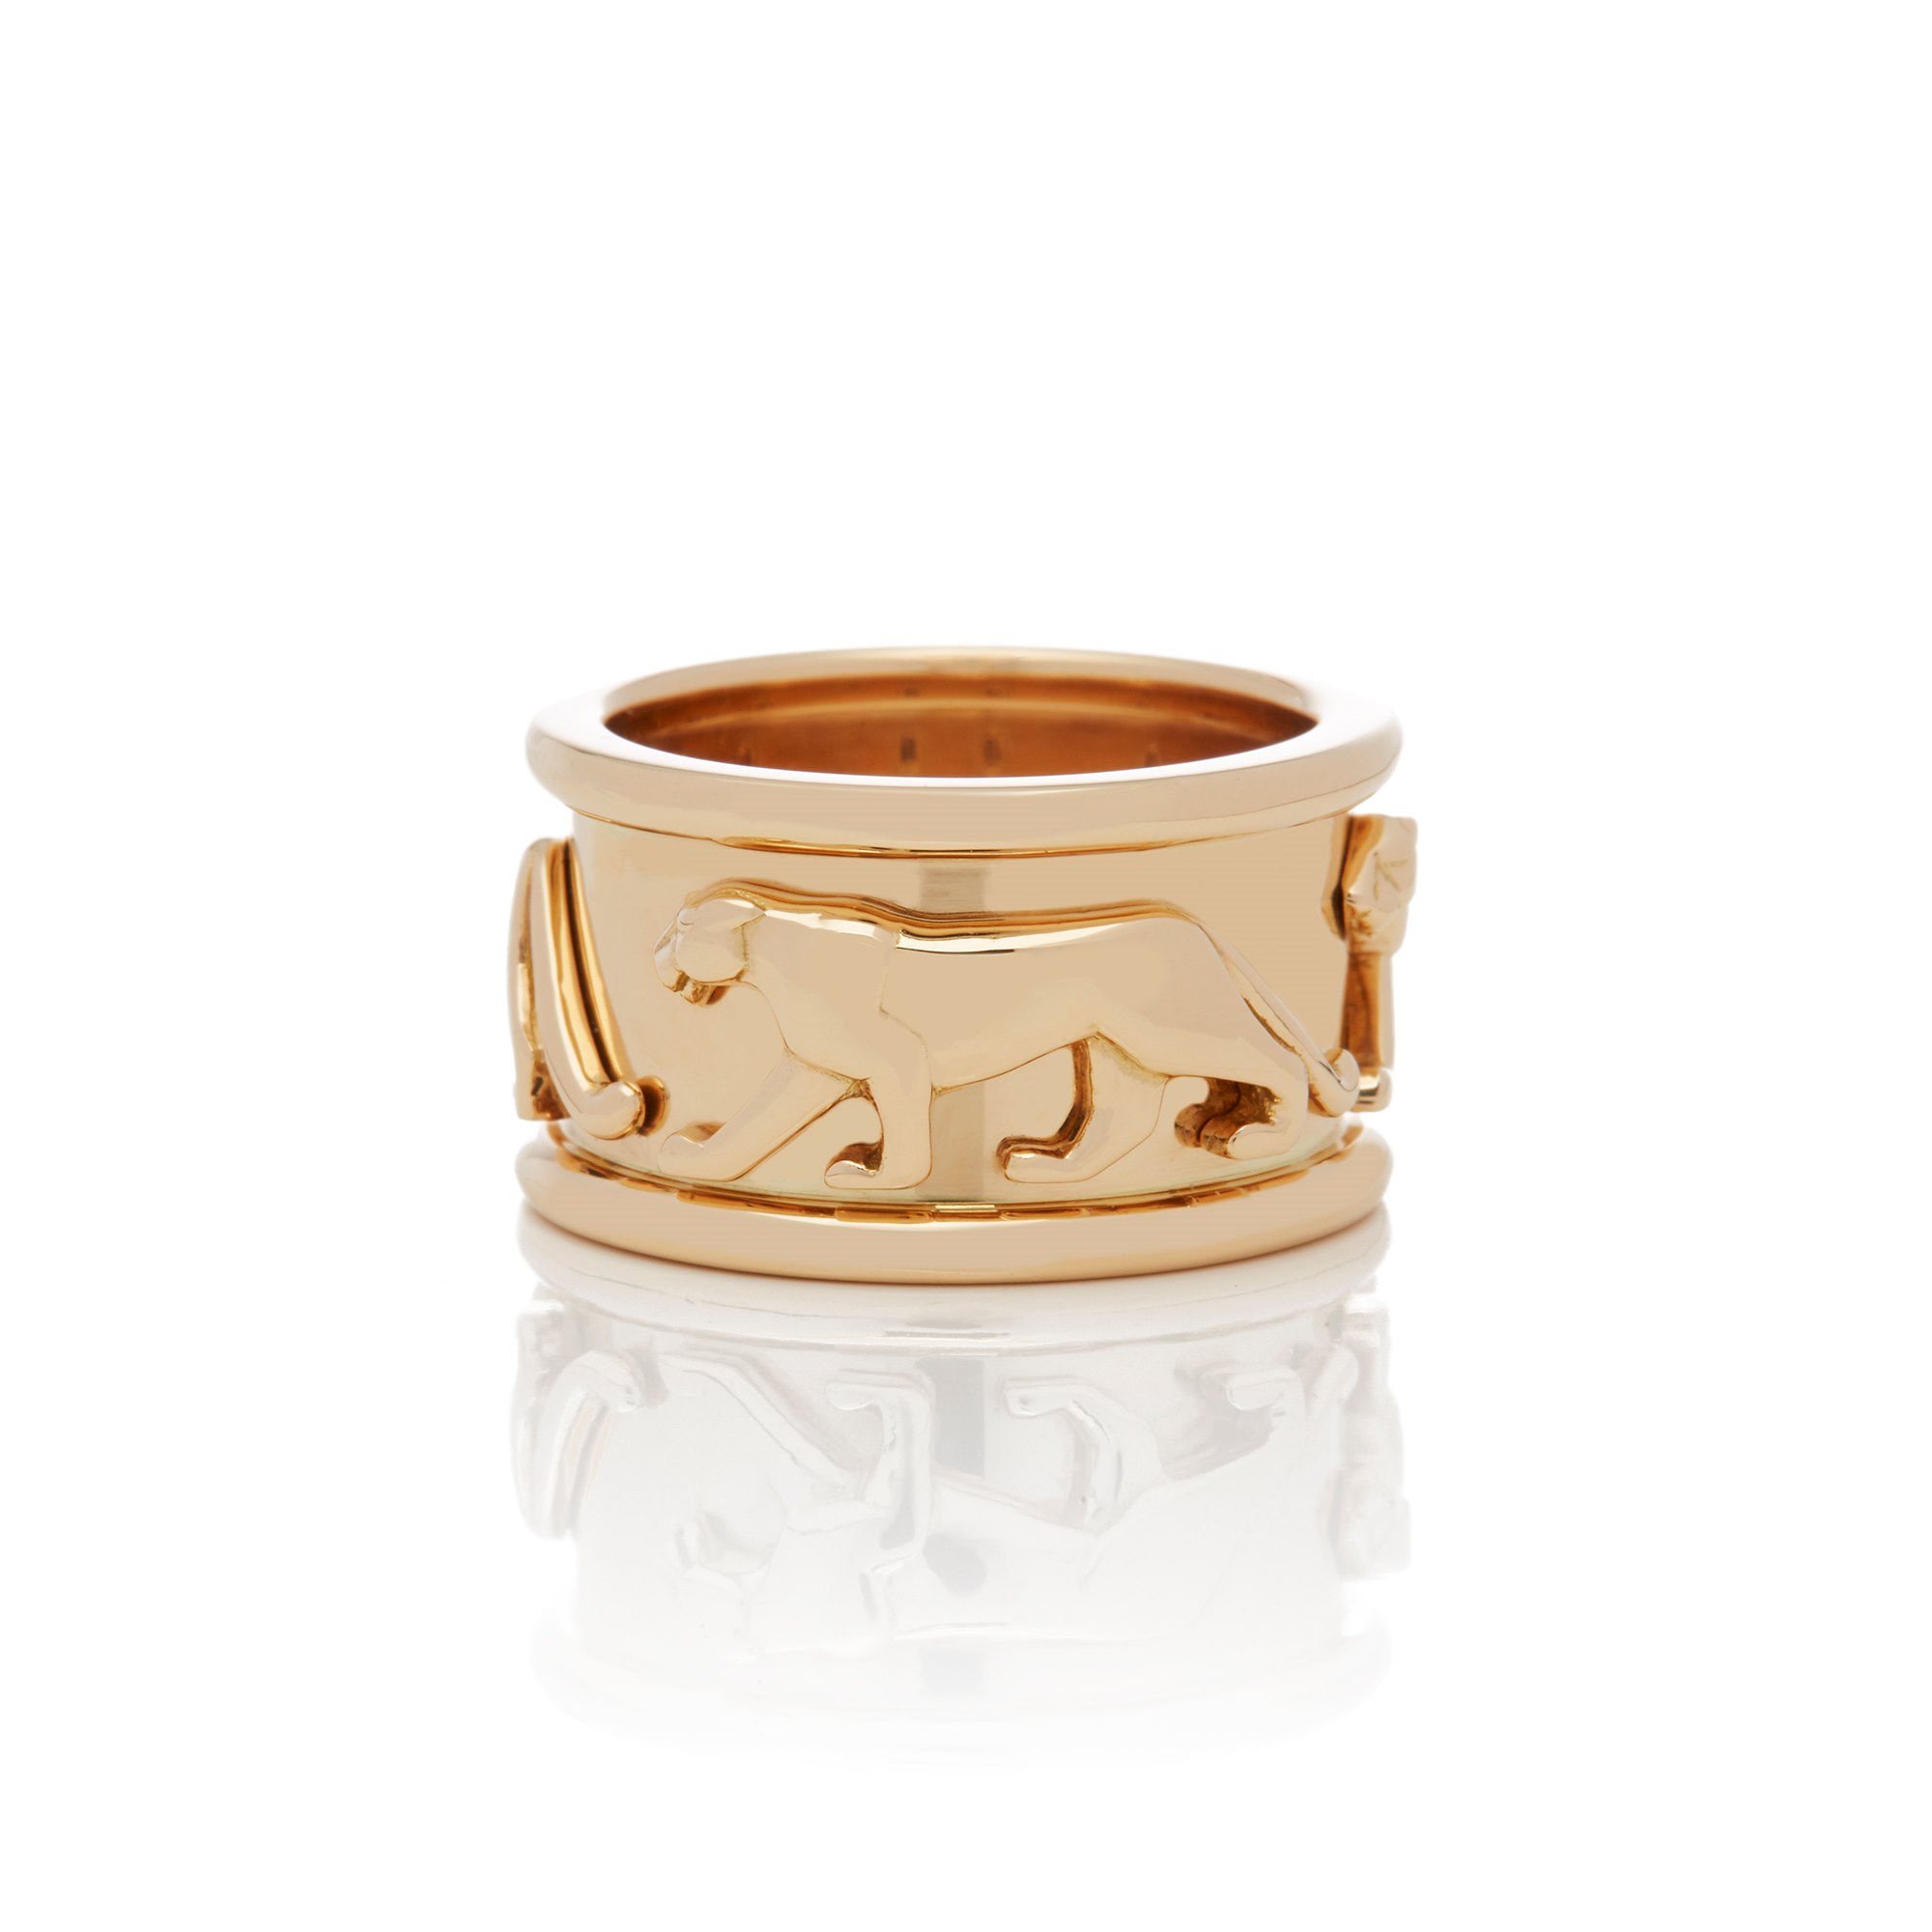 Cartier 18k Yellow Gold Panthere Ring